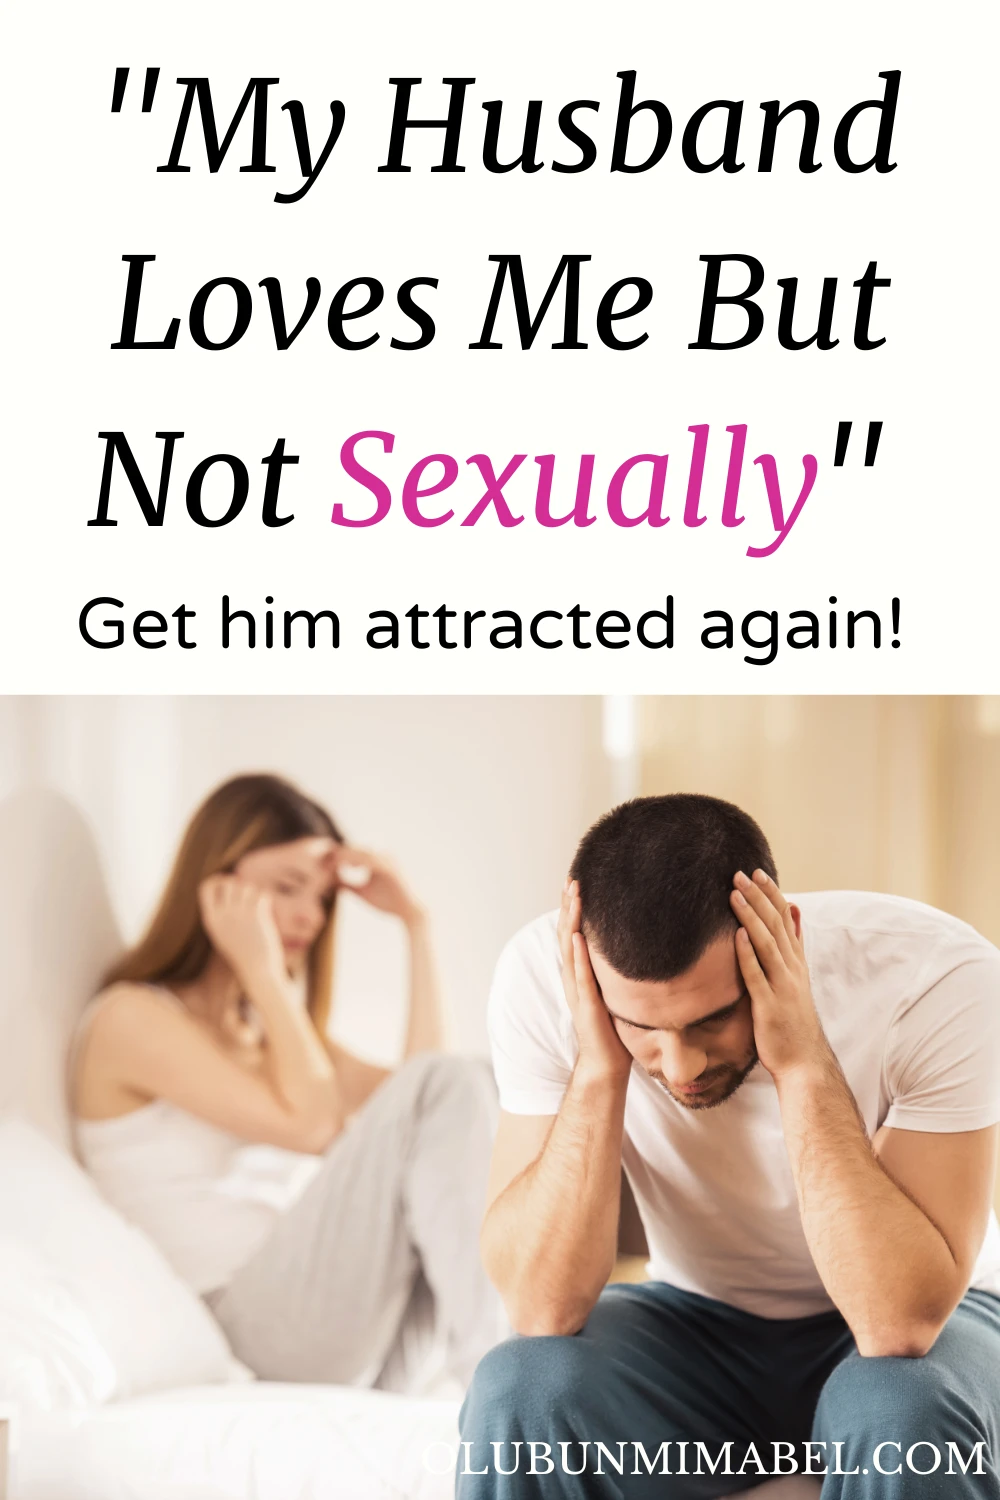 My Husband Loves Me But Not Sexually